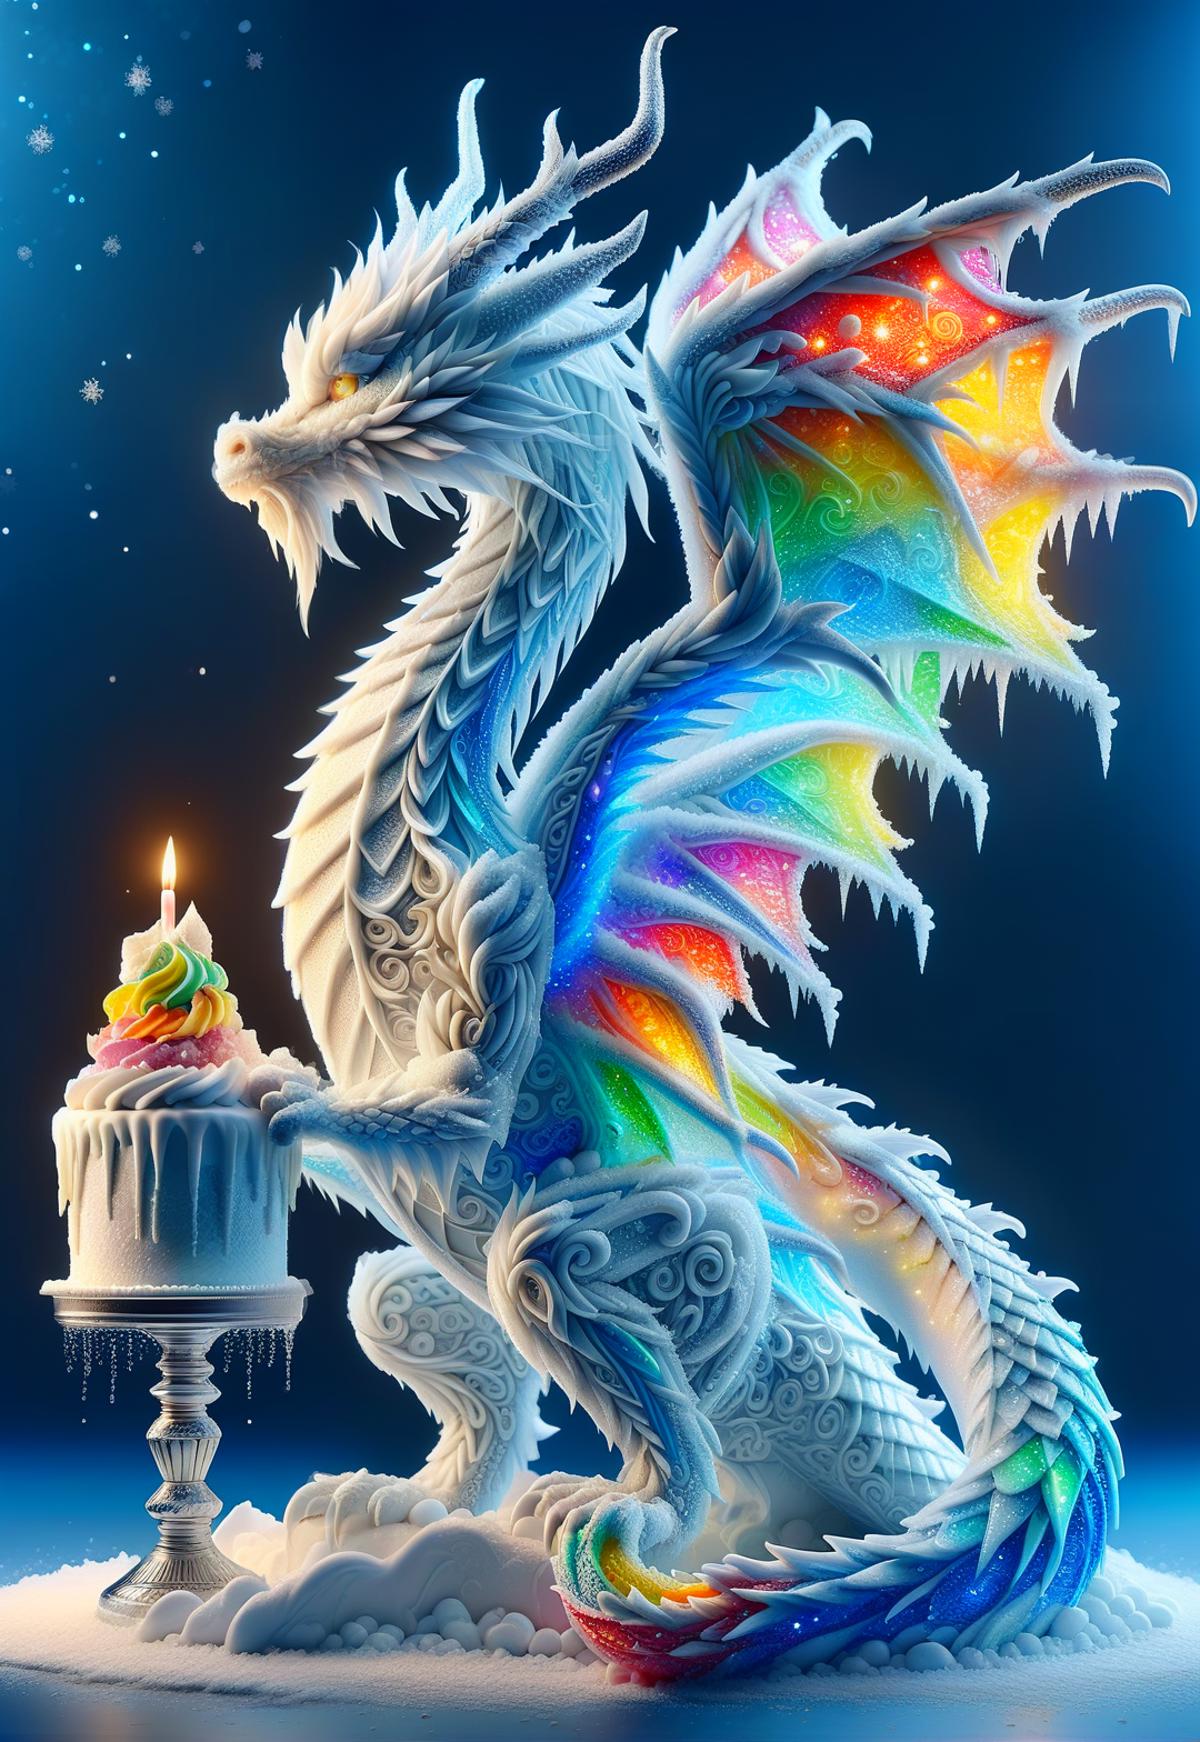 A colorful dragon-themed birthday cake with a lit candle.